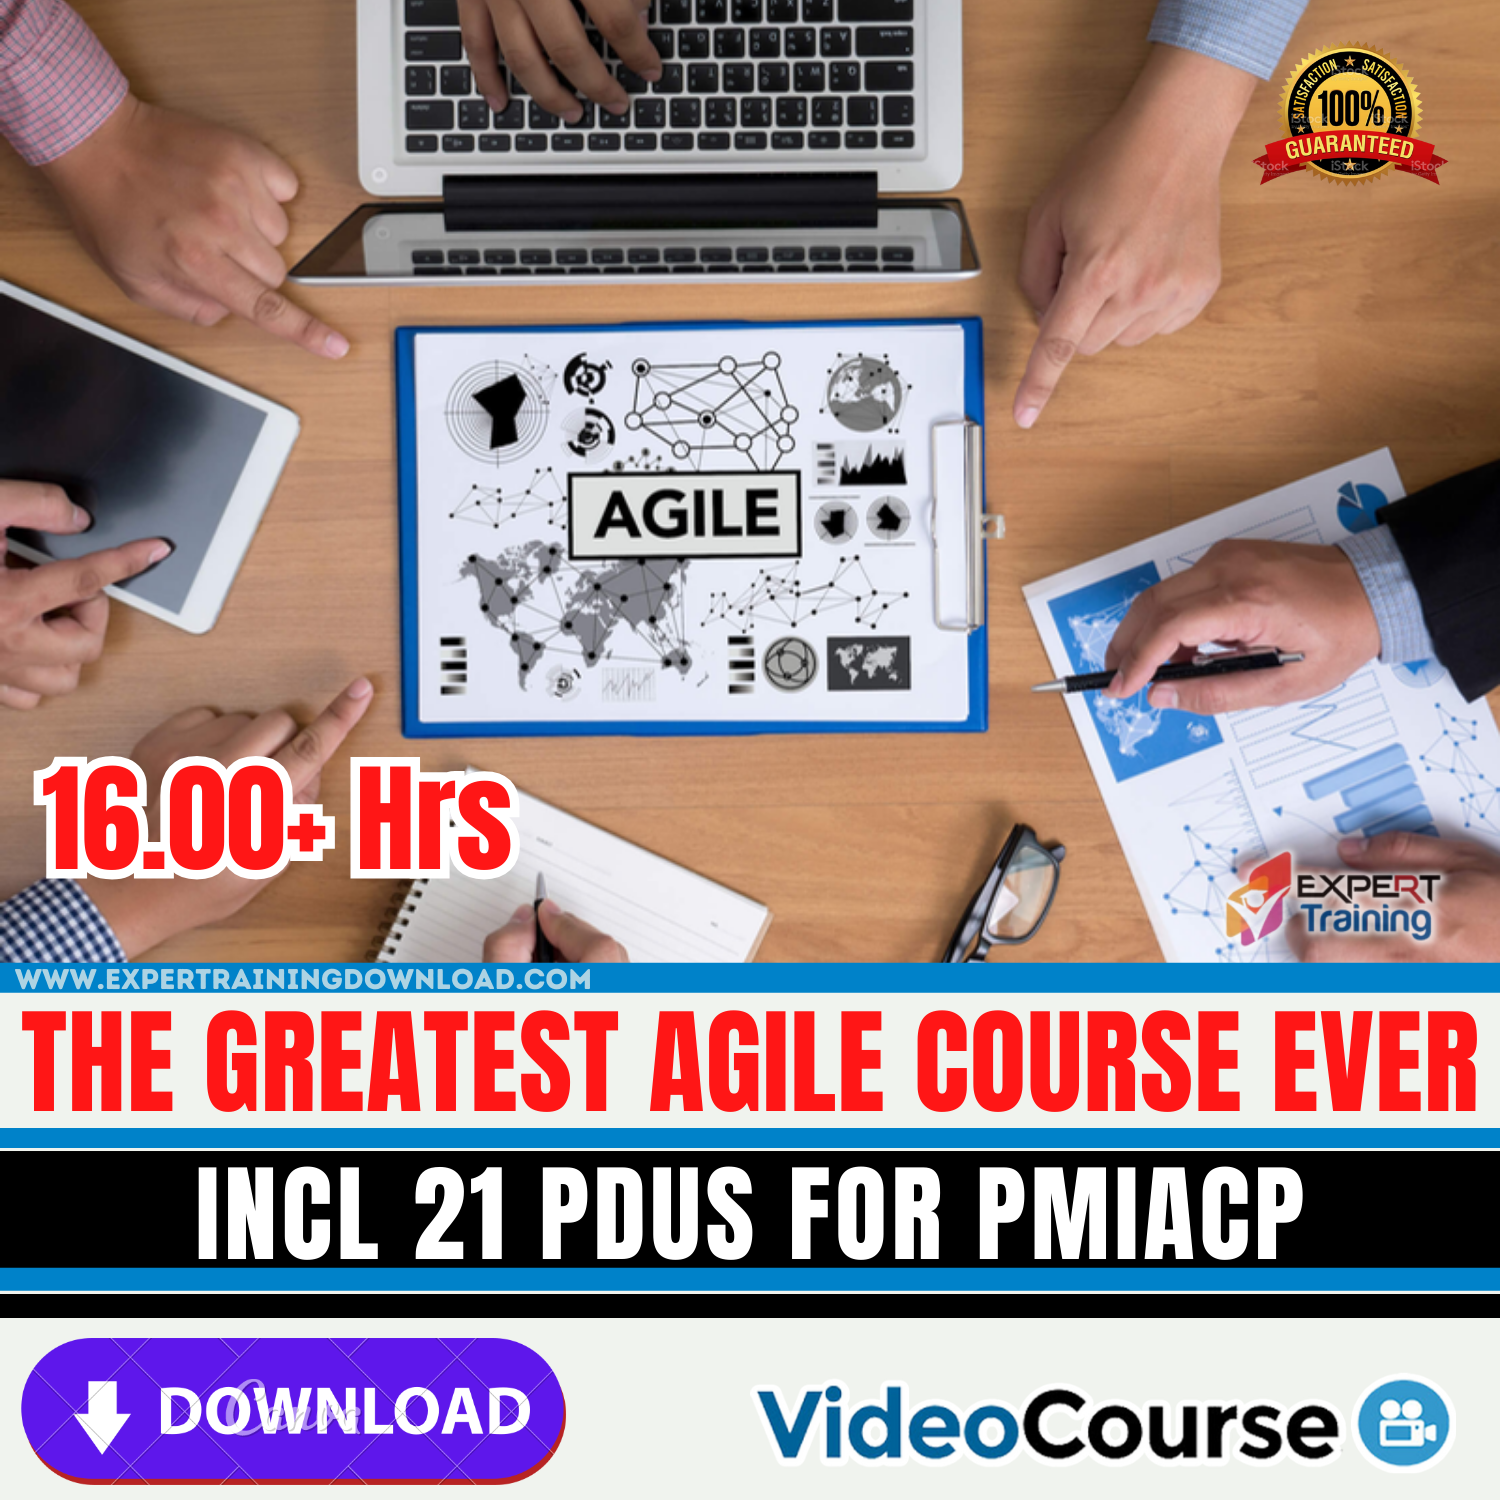 The Greatest Agile Course Ever incl 21 PDUs for PMIACP